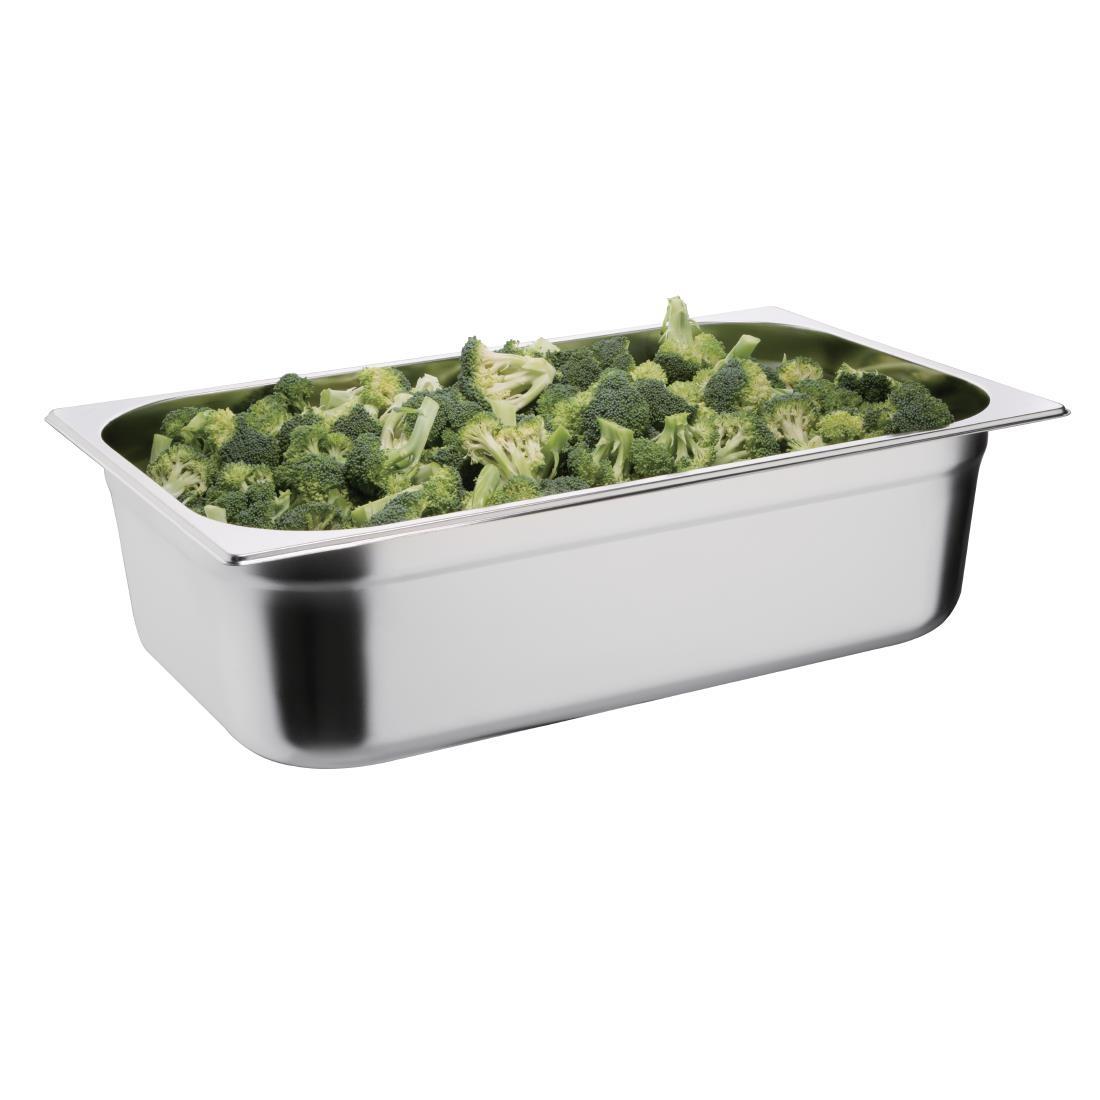 Vogue Stainless Steel 1/1 Gastronorm Pan 150mm - K924  - 8